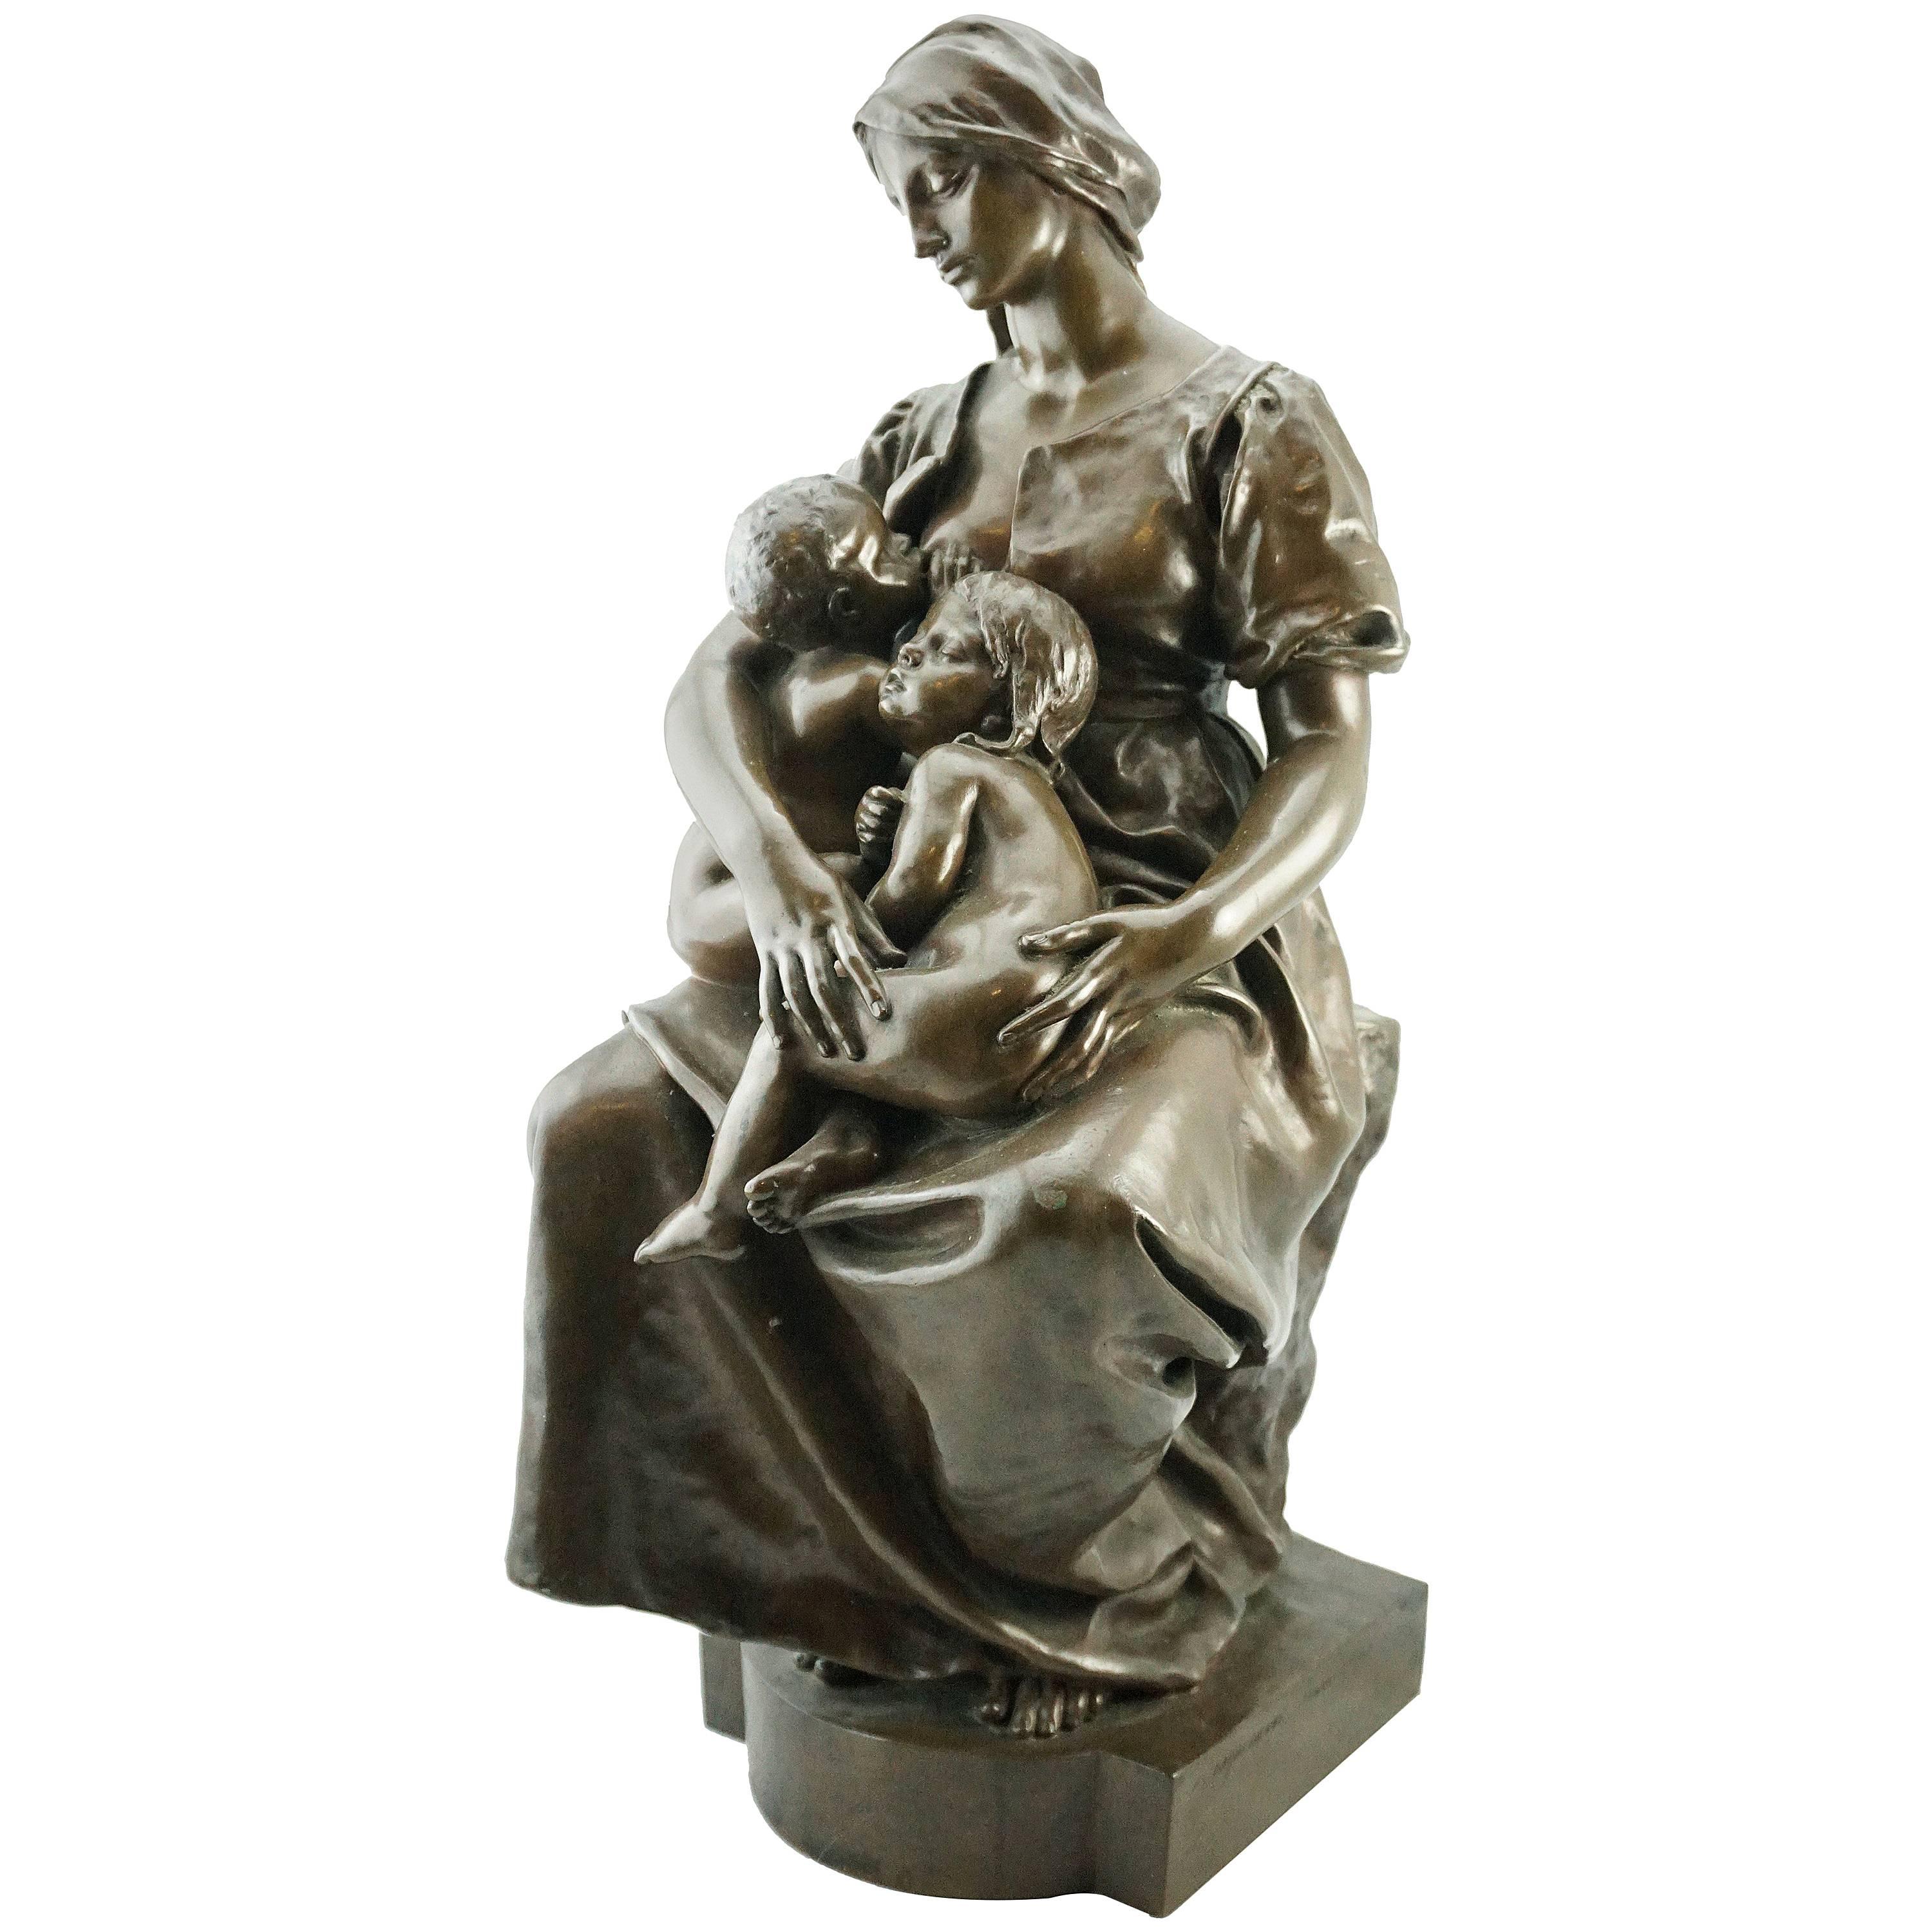 19th Century Paul Dubois Barbedienne Bronze of Mother and Child "Charity"